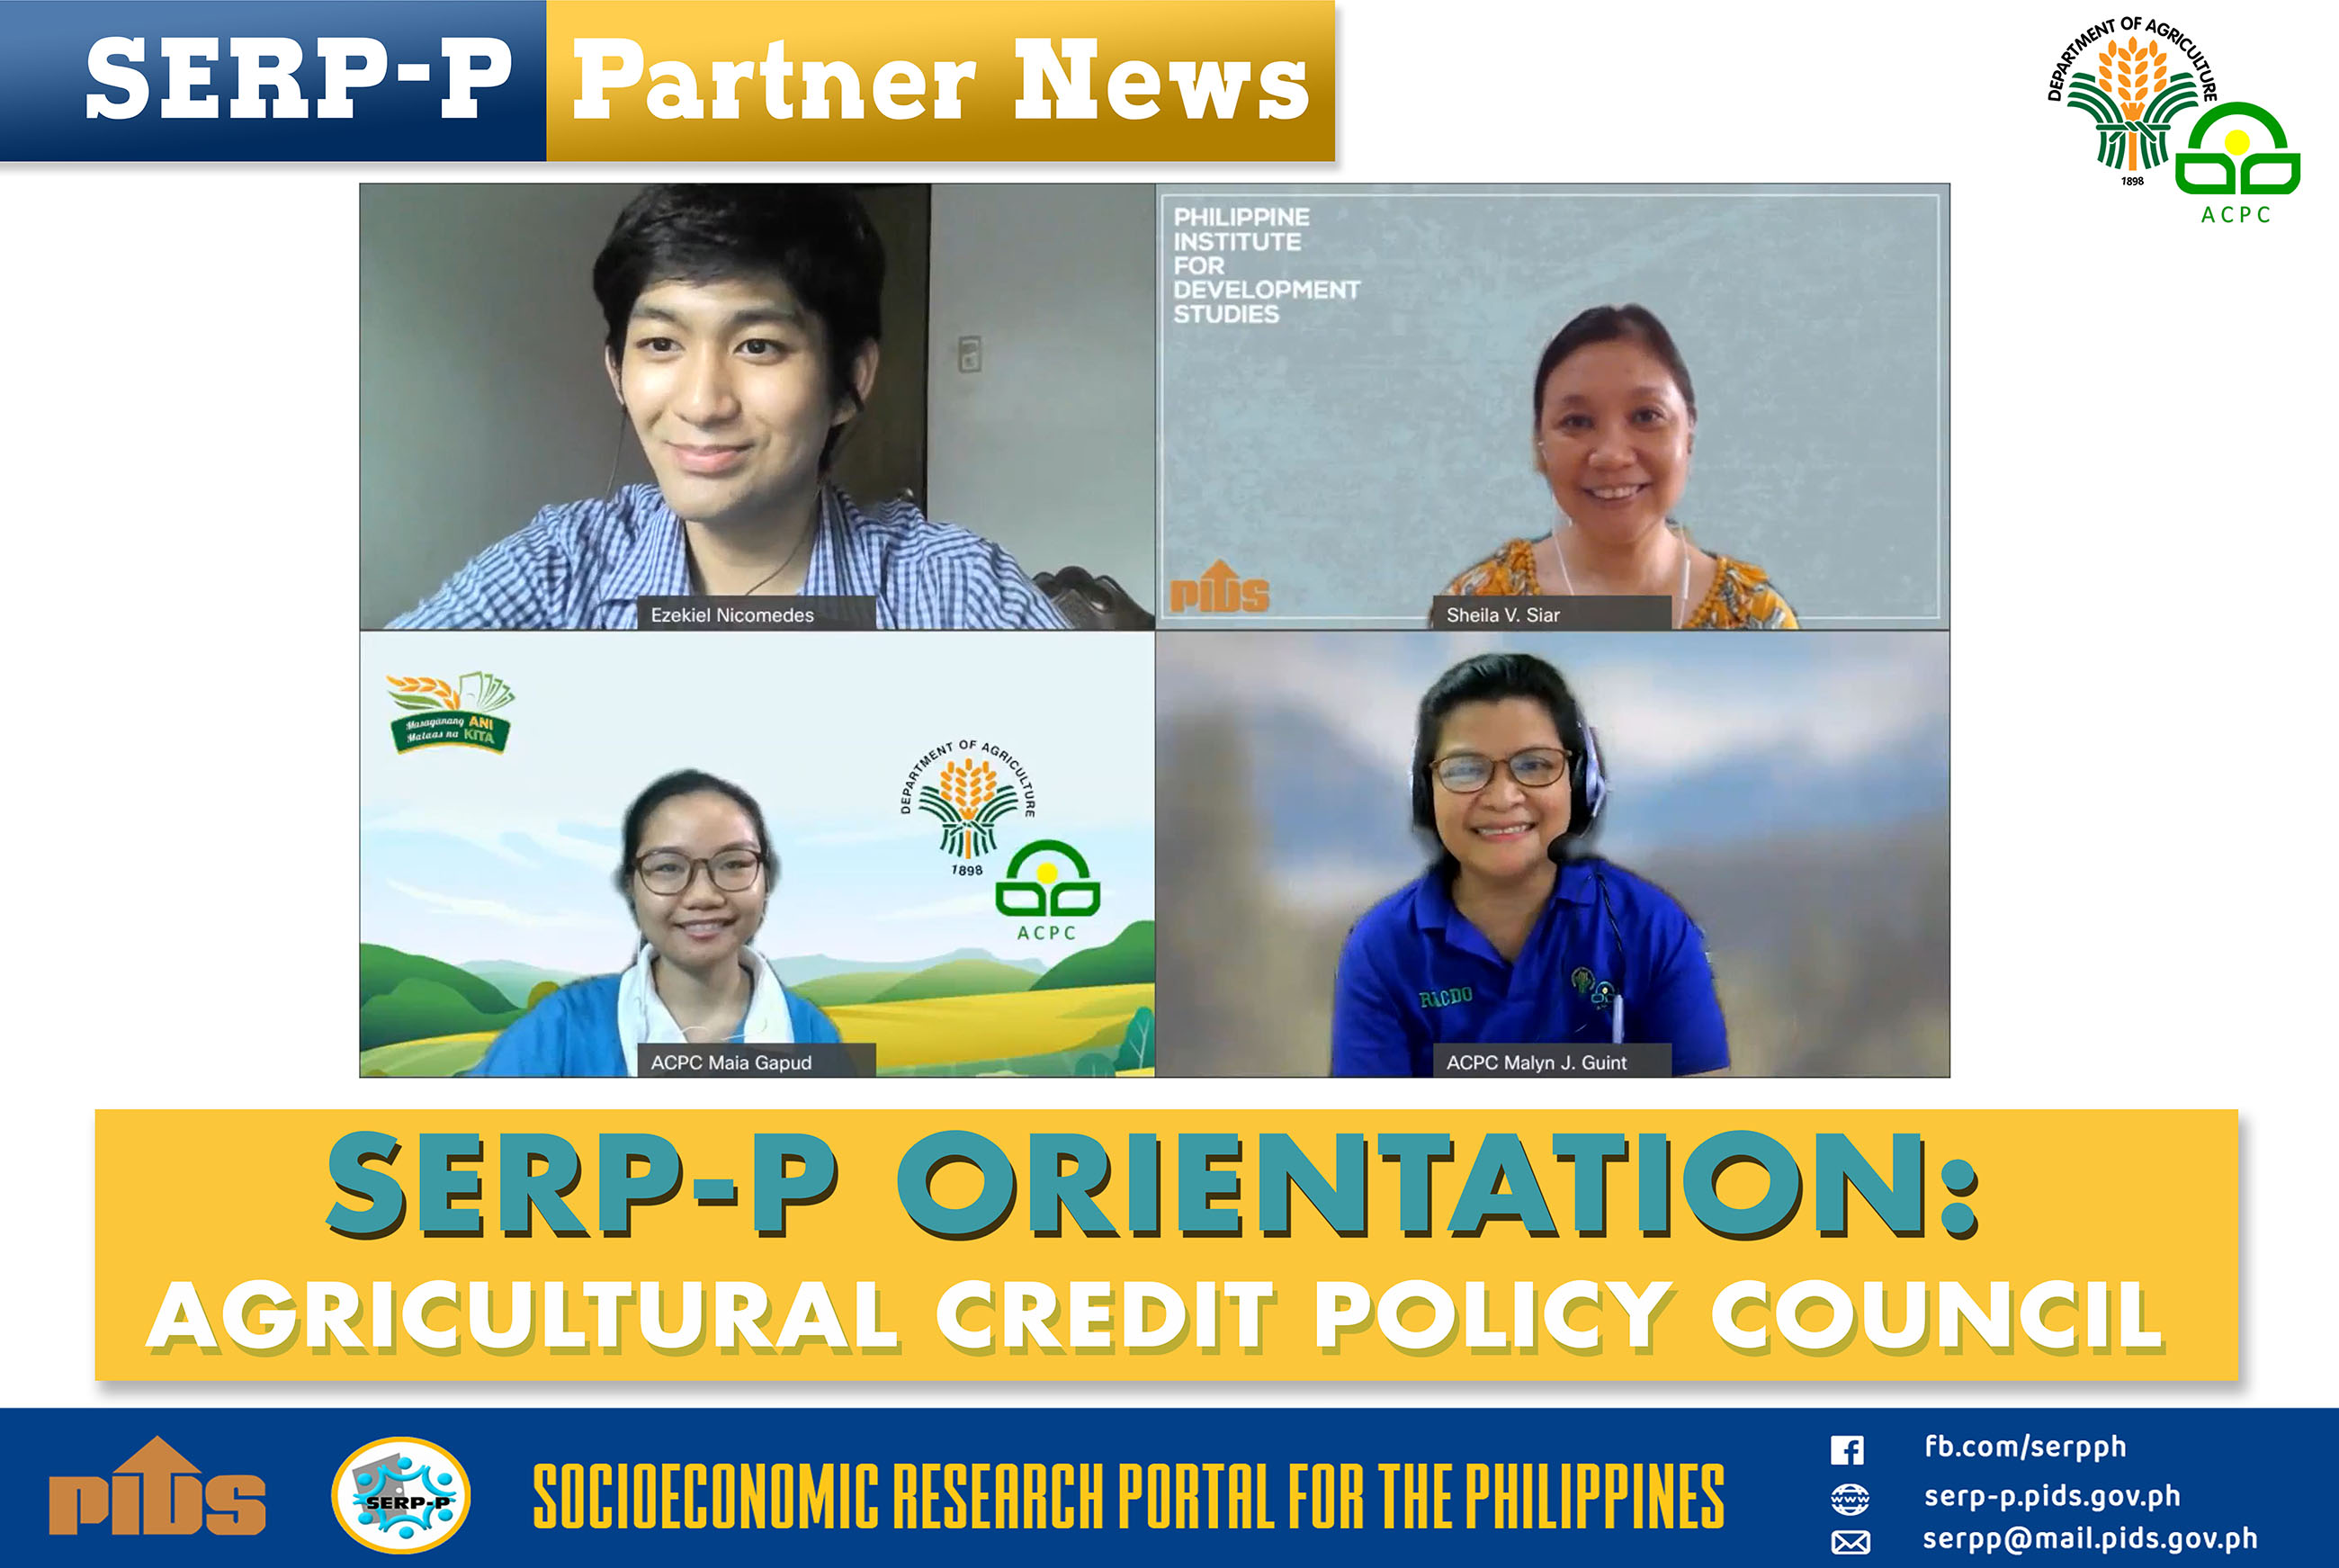 SERP-P Orientation with Agricultural Credit Policy Council-serp-p agricultural credit.jpg